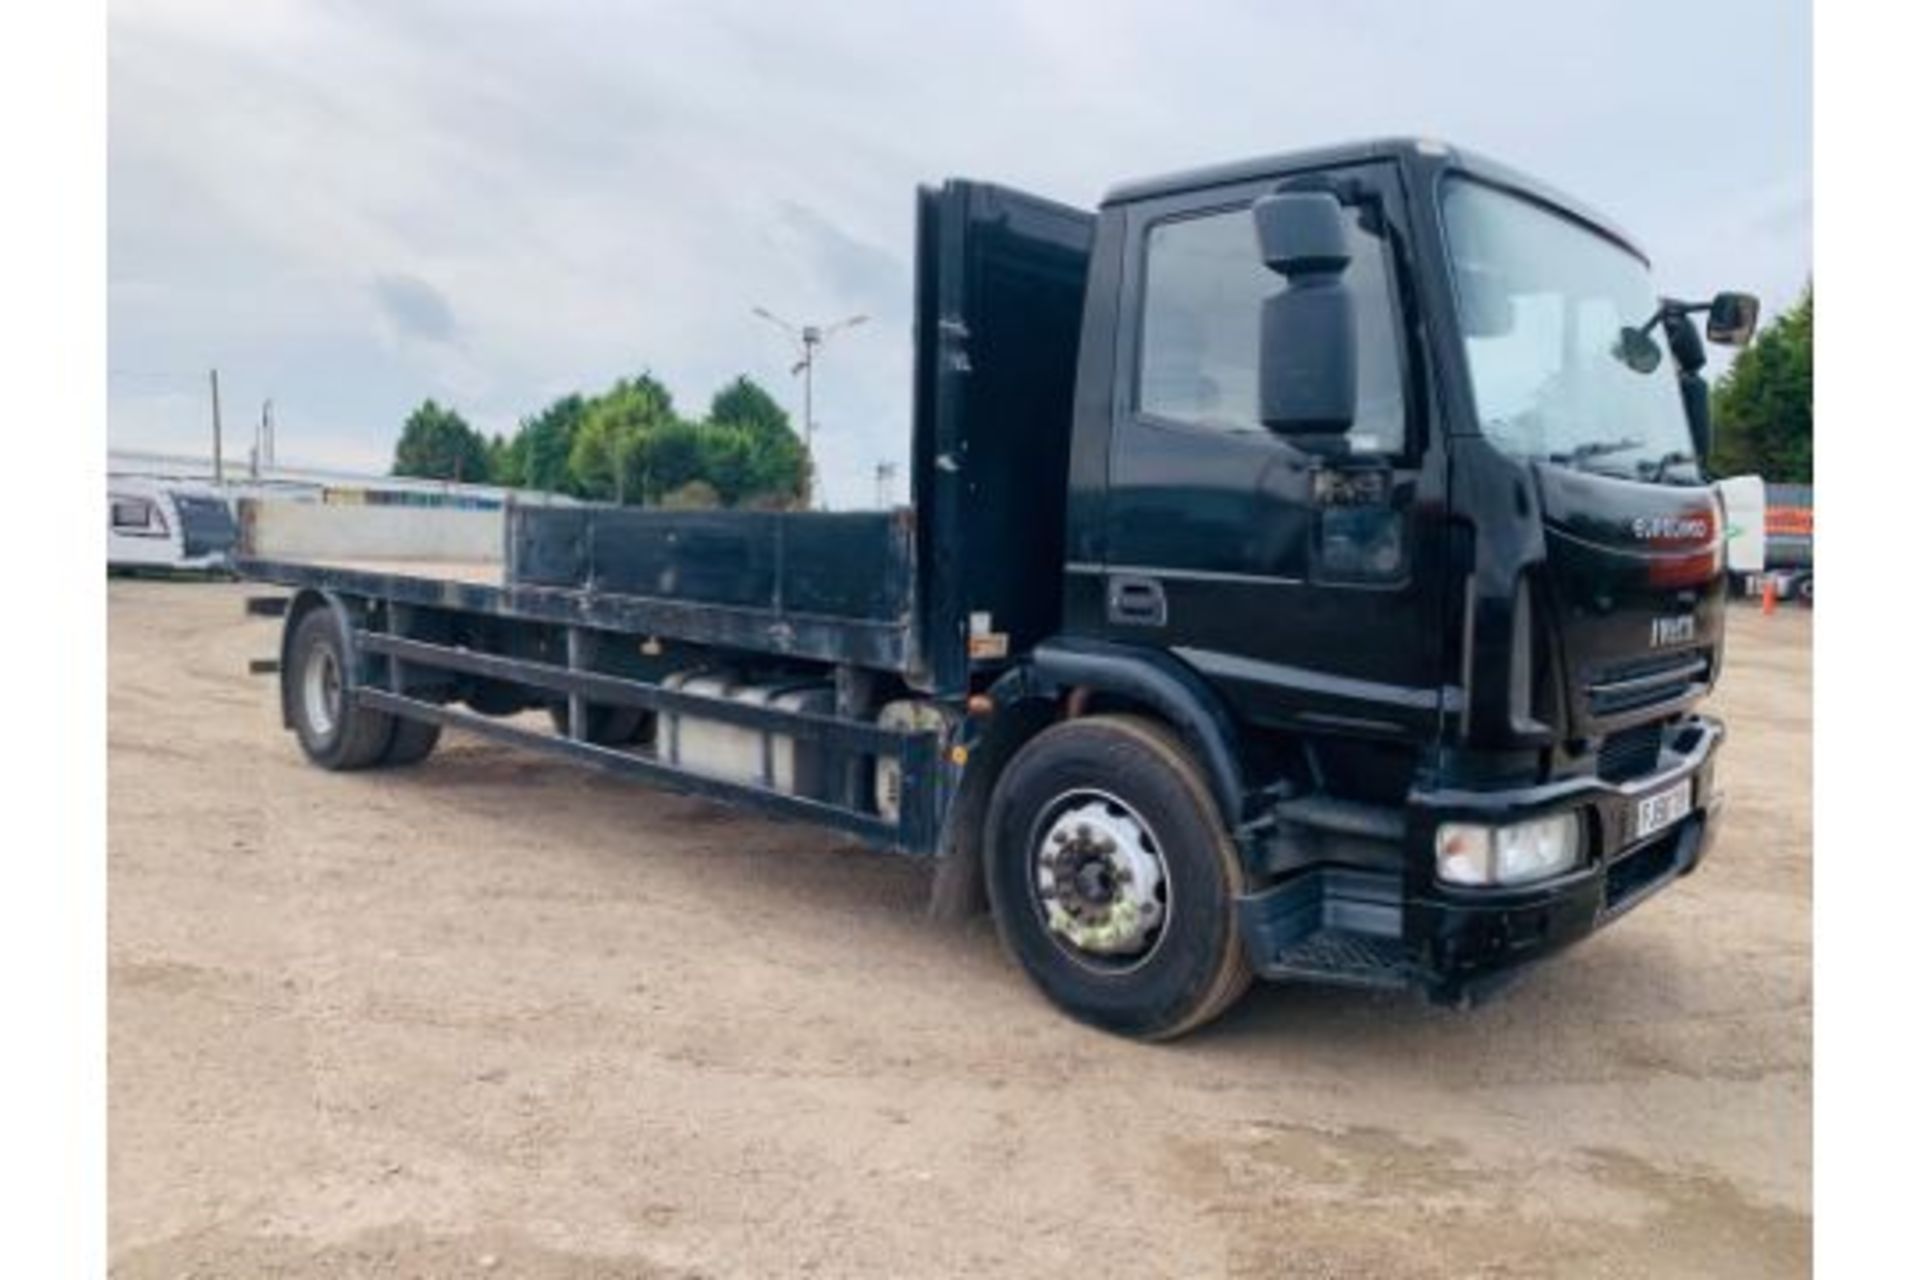 (RESERVE MET) Iveco Eurocargo 180E25 - 2009 Year - 18 Tonne - 4x2 - Day Cab Truck